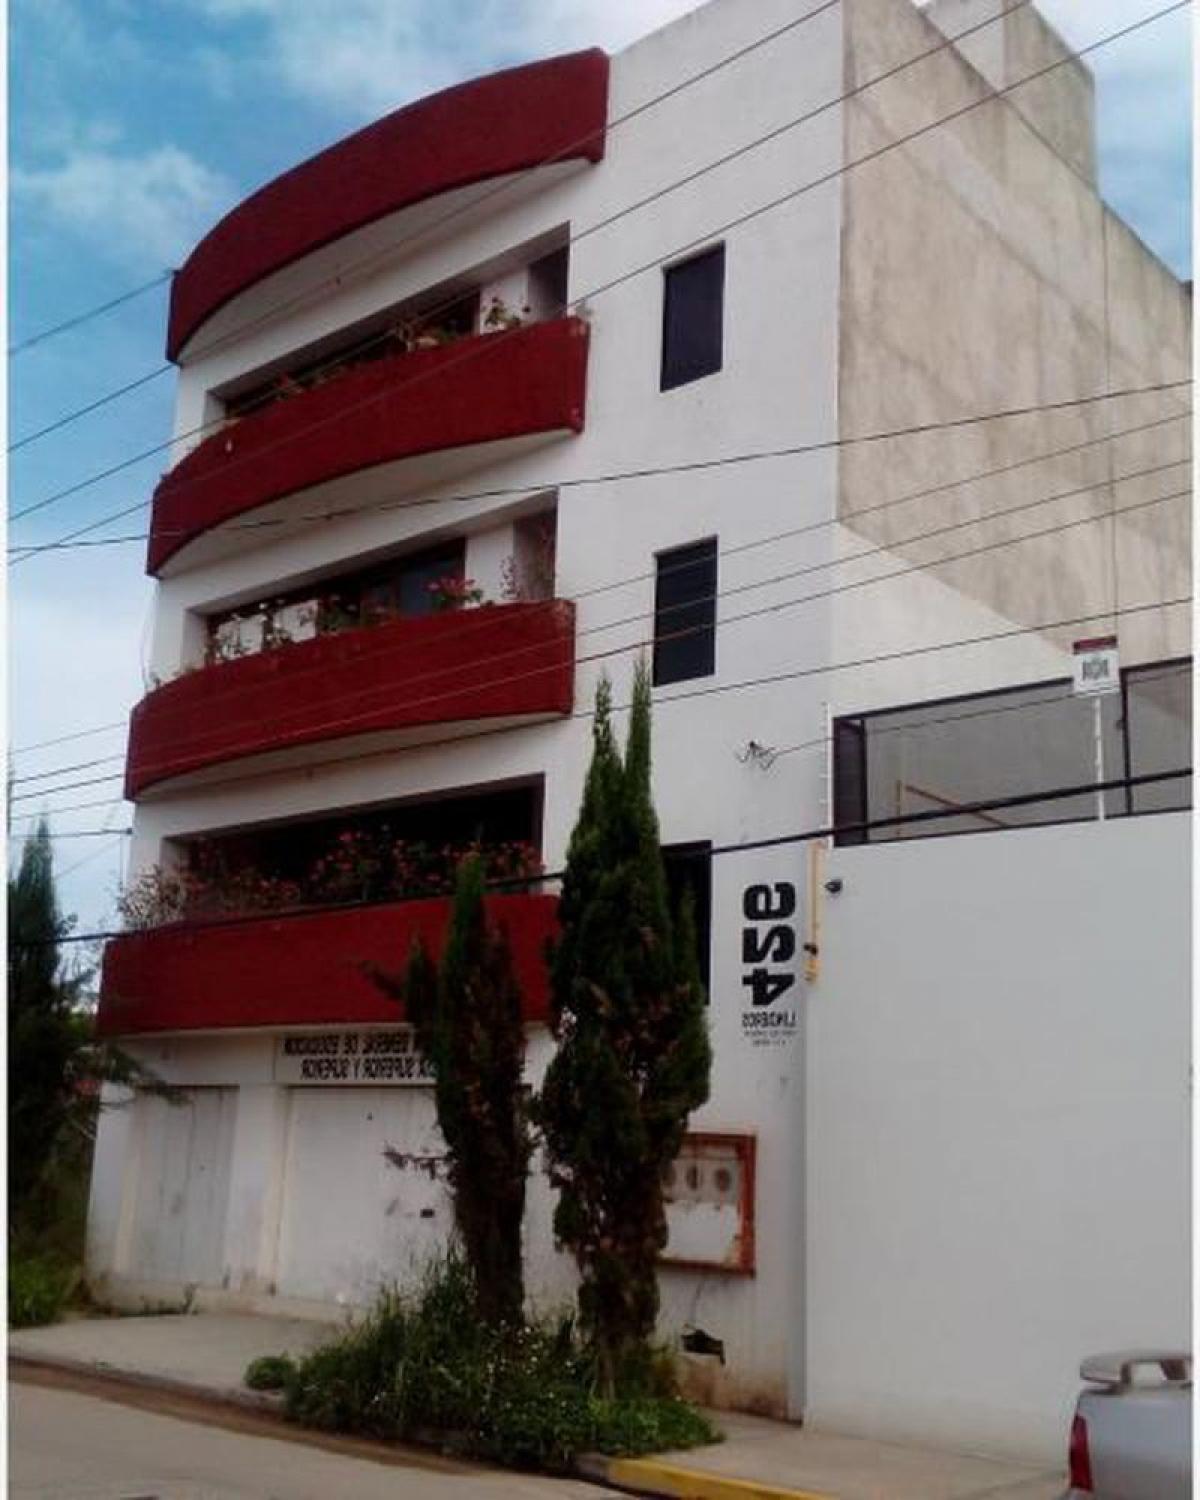 Picture of Apartment Building For Sale in Oaxaca, Oaxaca, Mexico